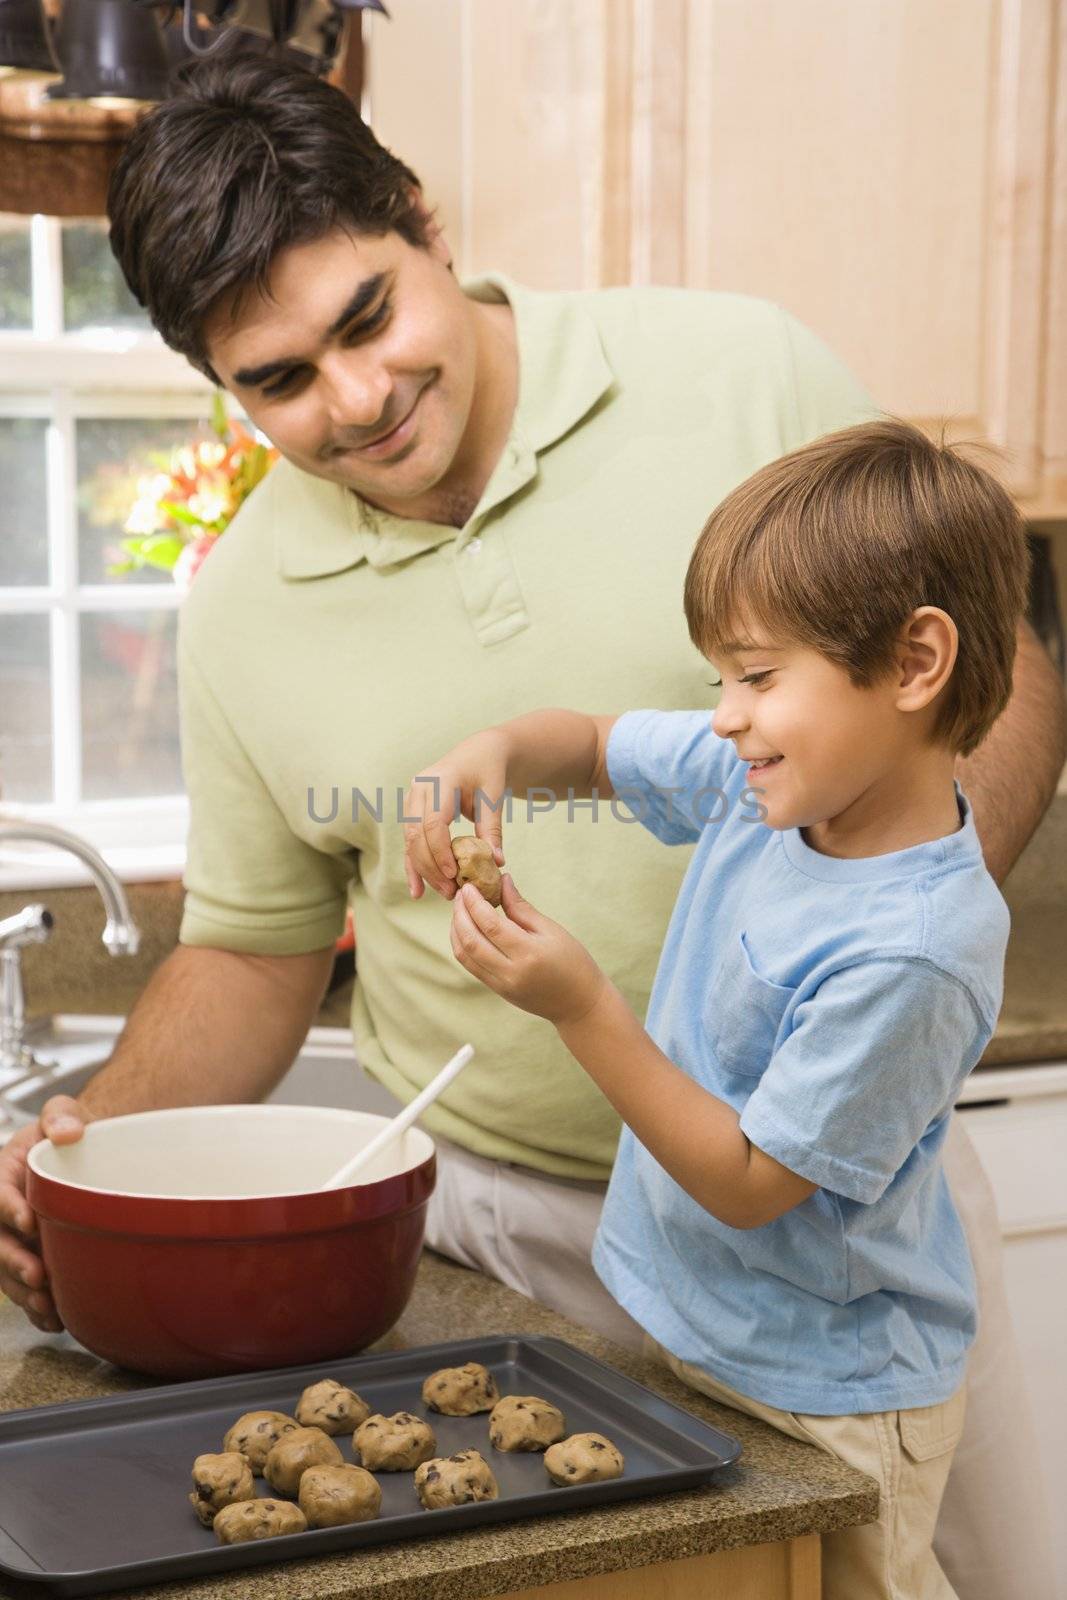 Hispanic father and son in kitchen making cookies.